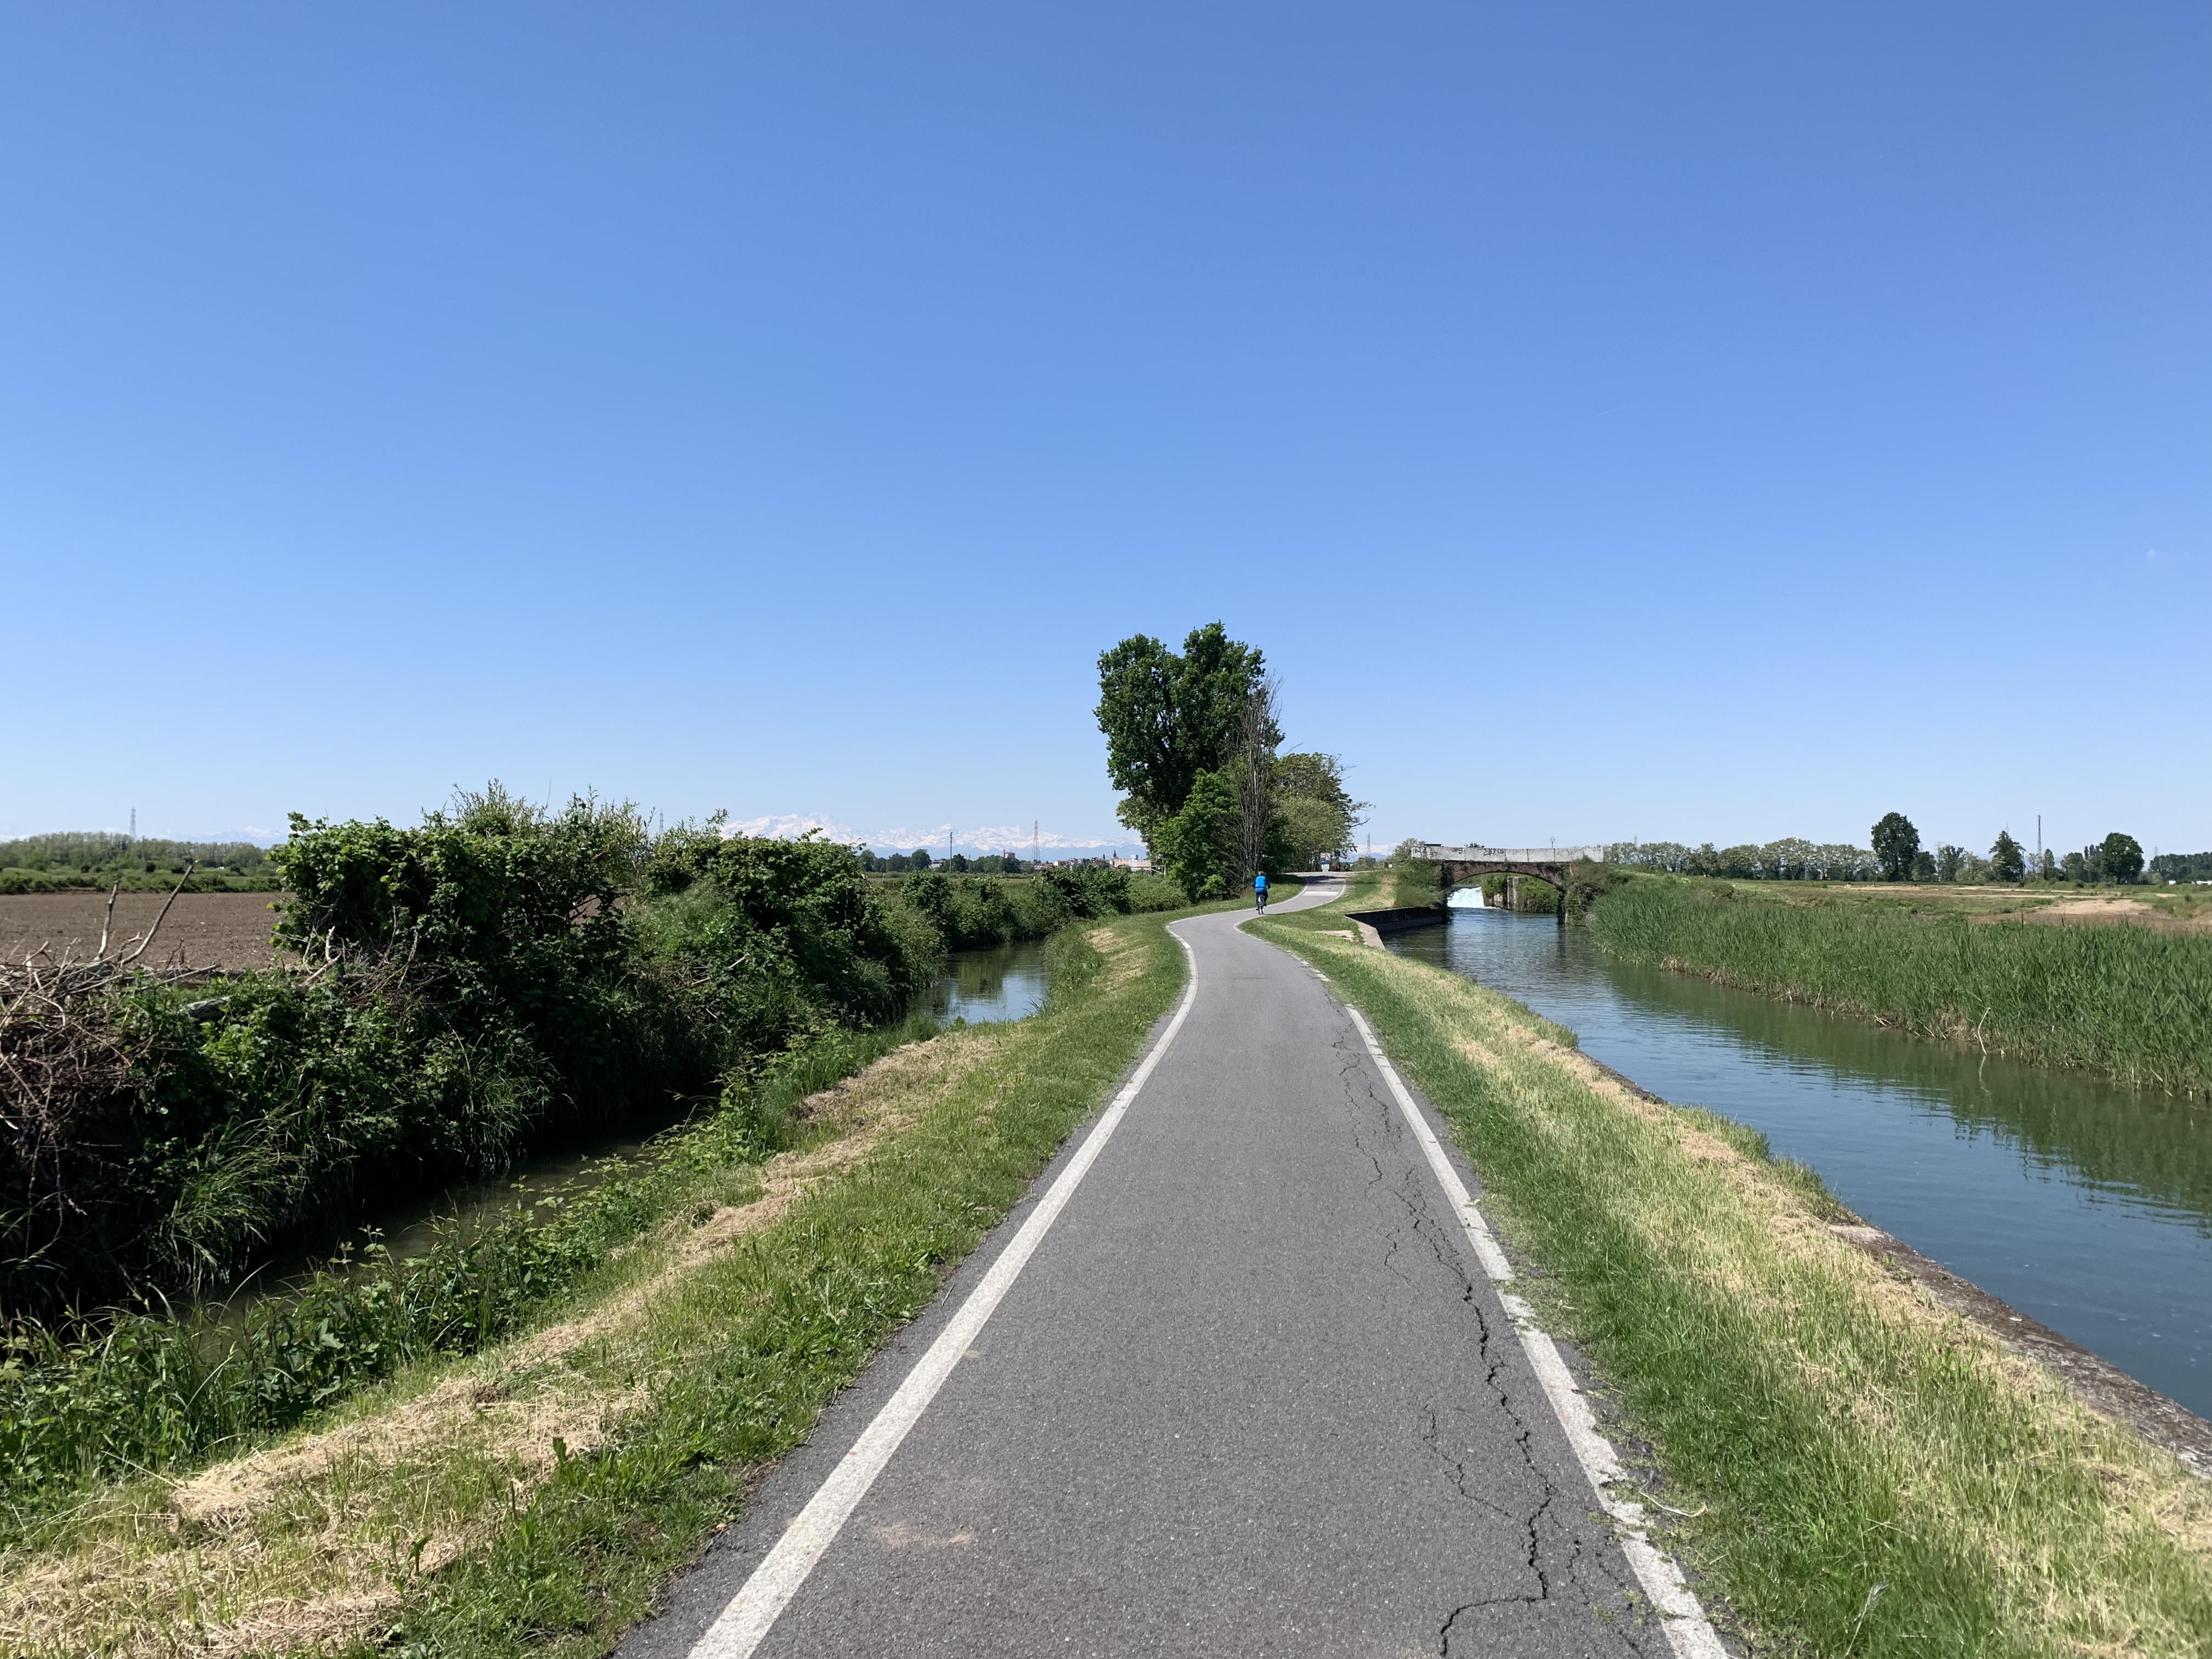 Amazing canal-side bike paths with Alps in the back